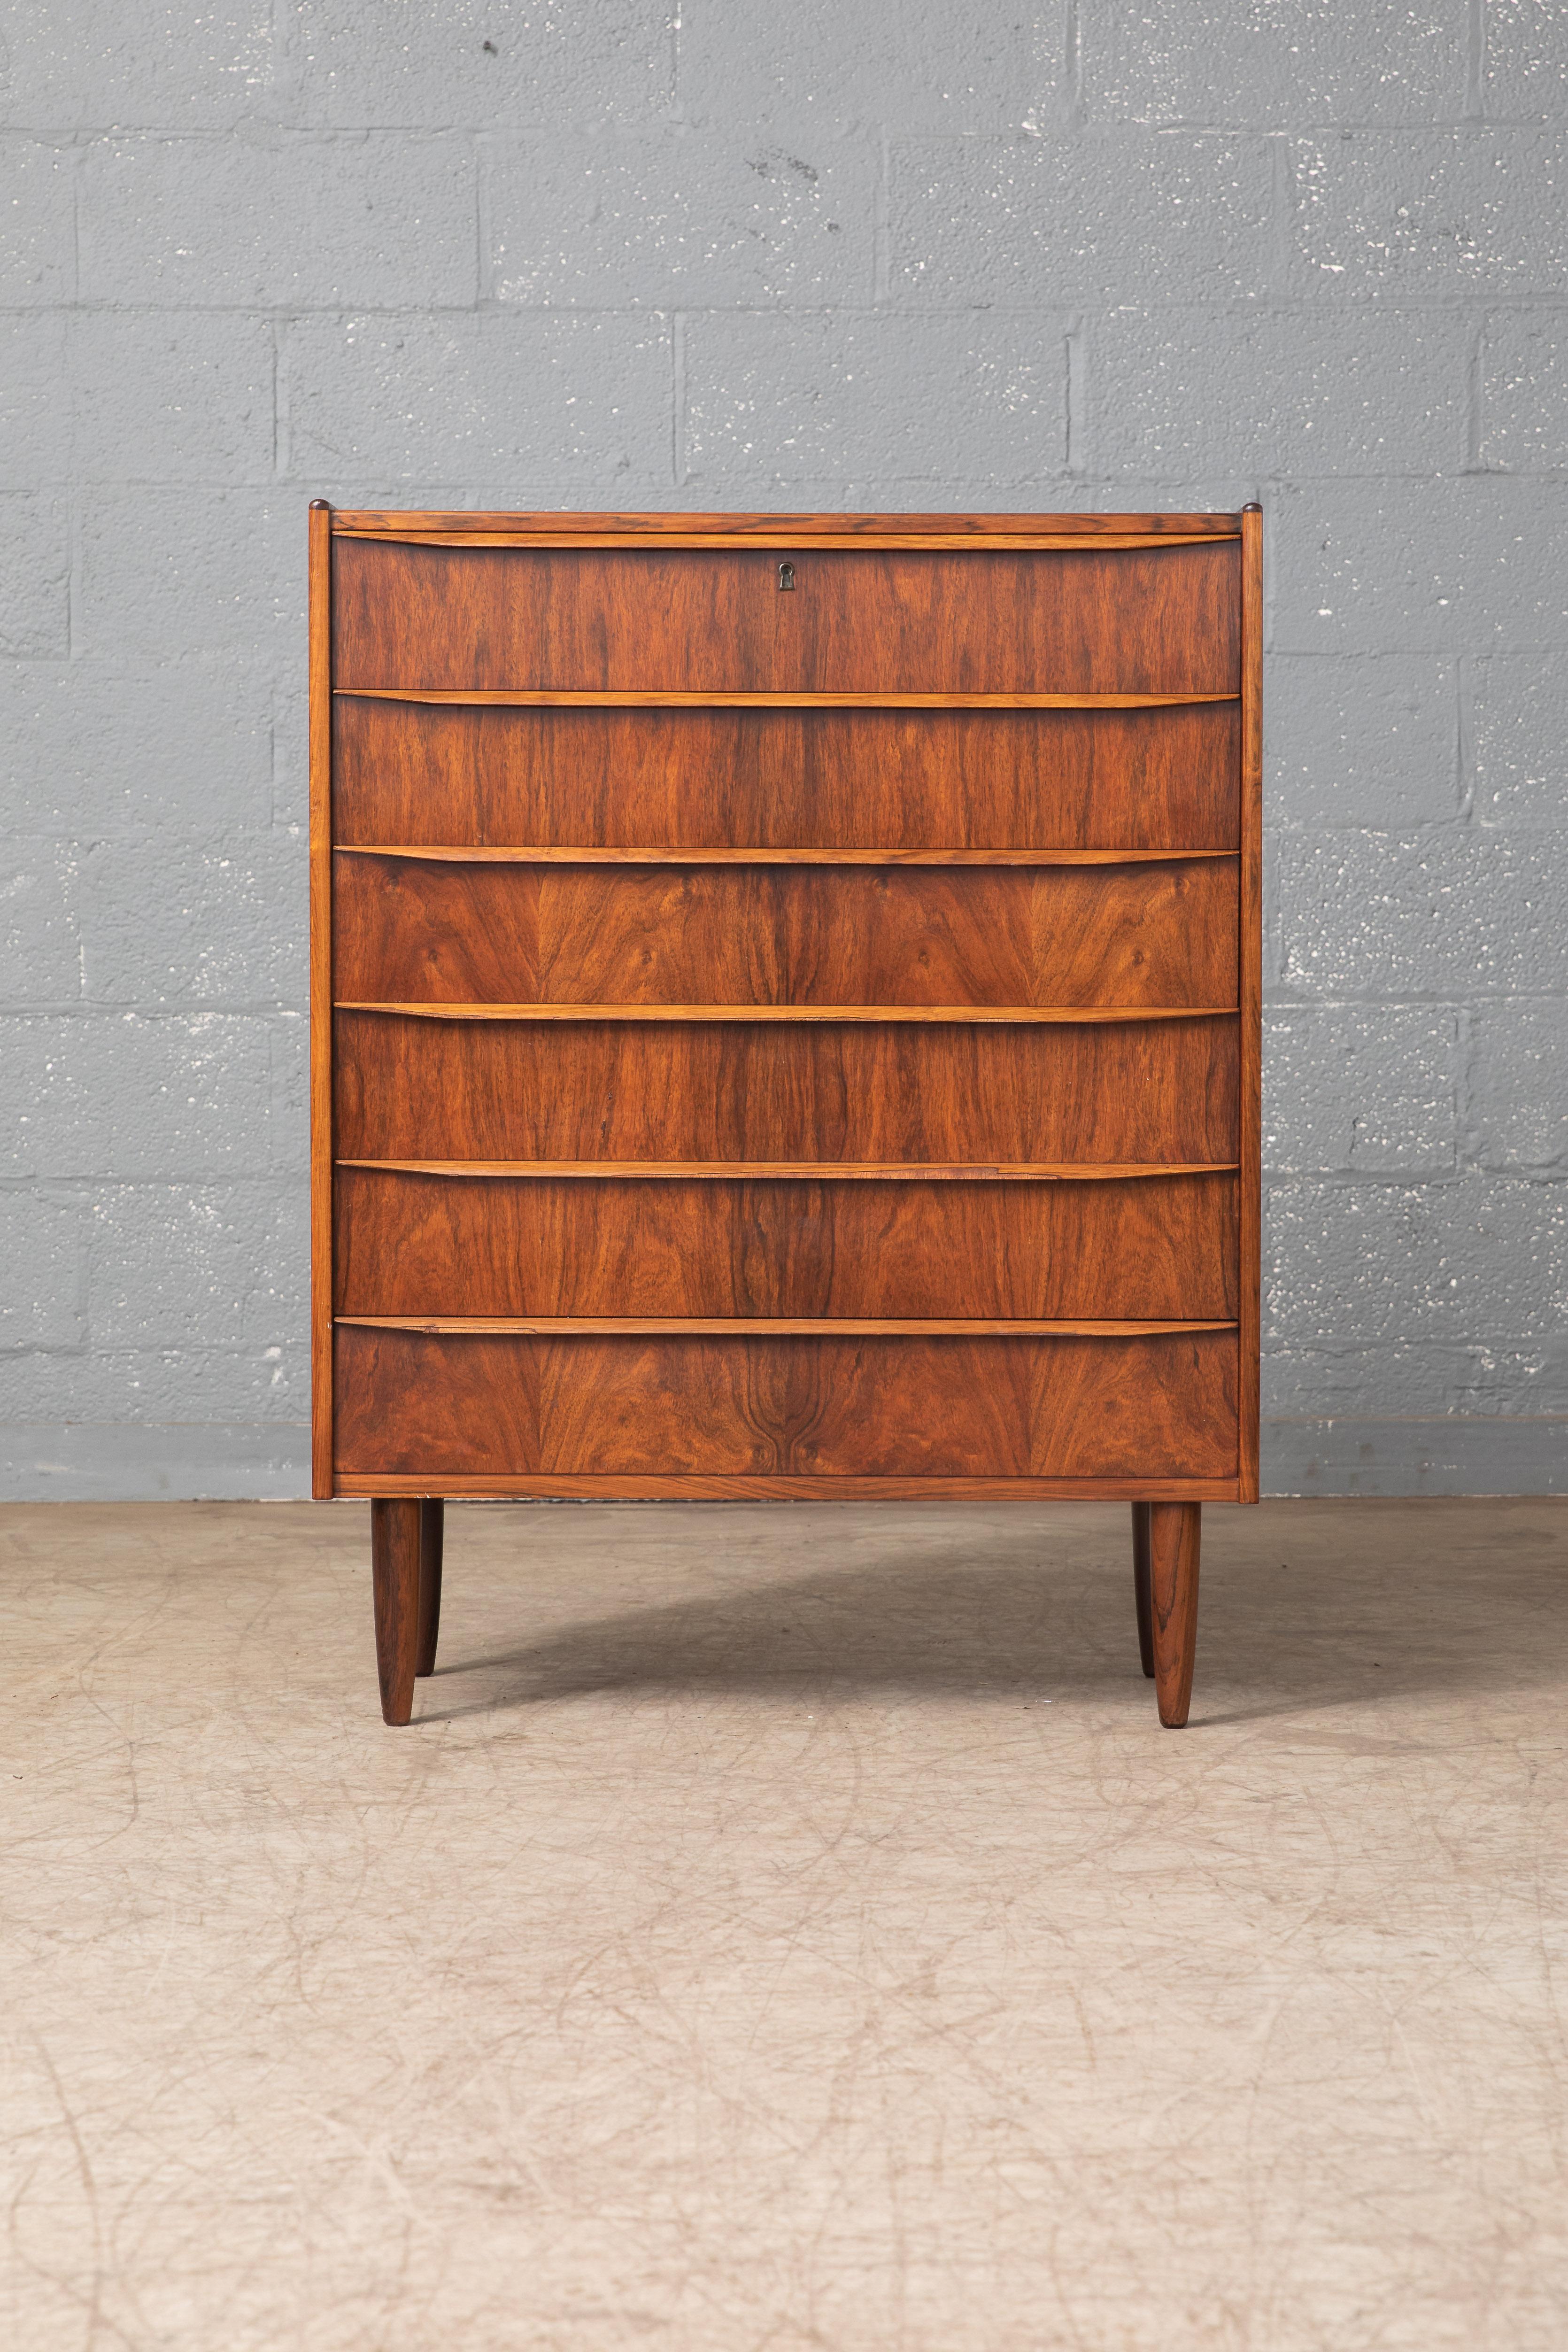 Exquisite 1960s rosewood chest of drawers with six large drawers in bookmatched rosewood veneer. High quality craftmanship with solid raised edges and carved drawer pulls. Unmarked. Very good condition with just a few pices of missing veneer on a